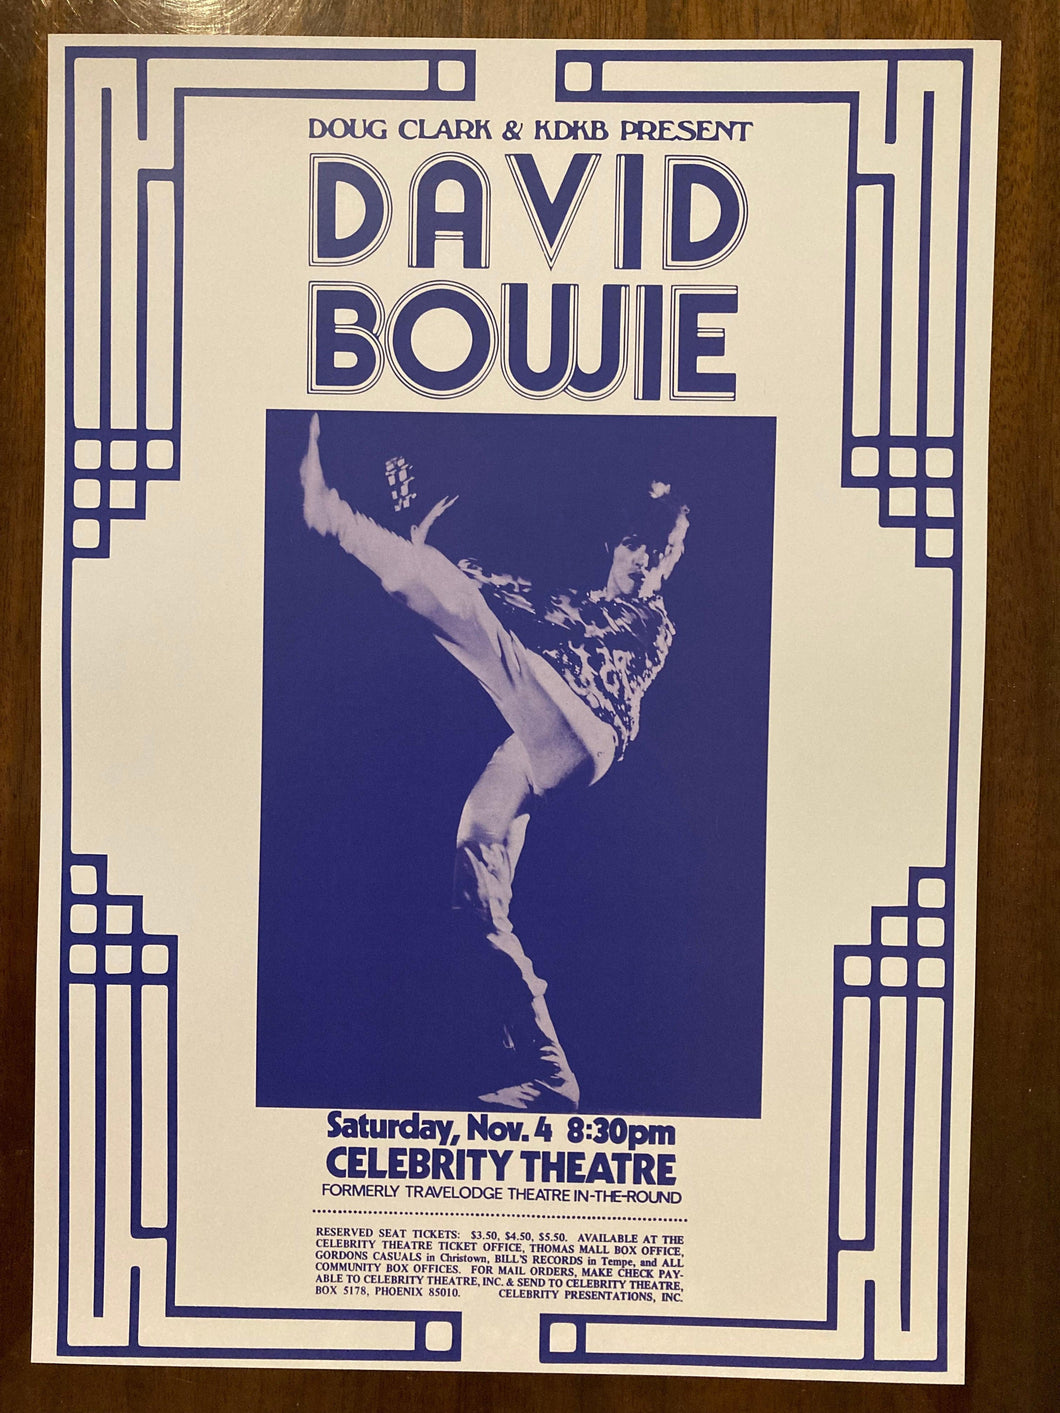 David Bowie concert poster - Ziggy Stardust live Celebrity Theatre USA 1972 A3 size repro - Original Music and Movie Posters for sale from Bamalama - Online Poster Store UK London